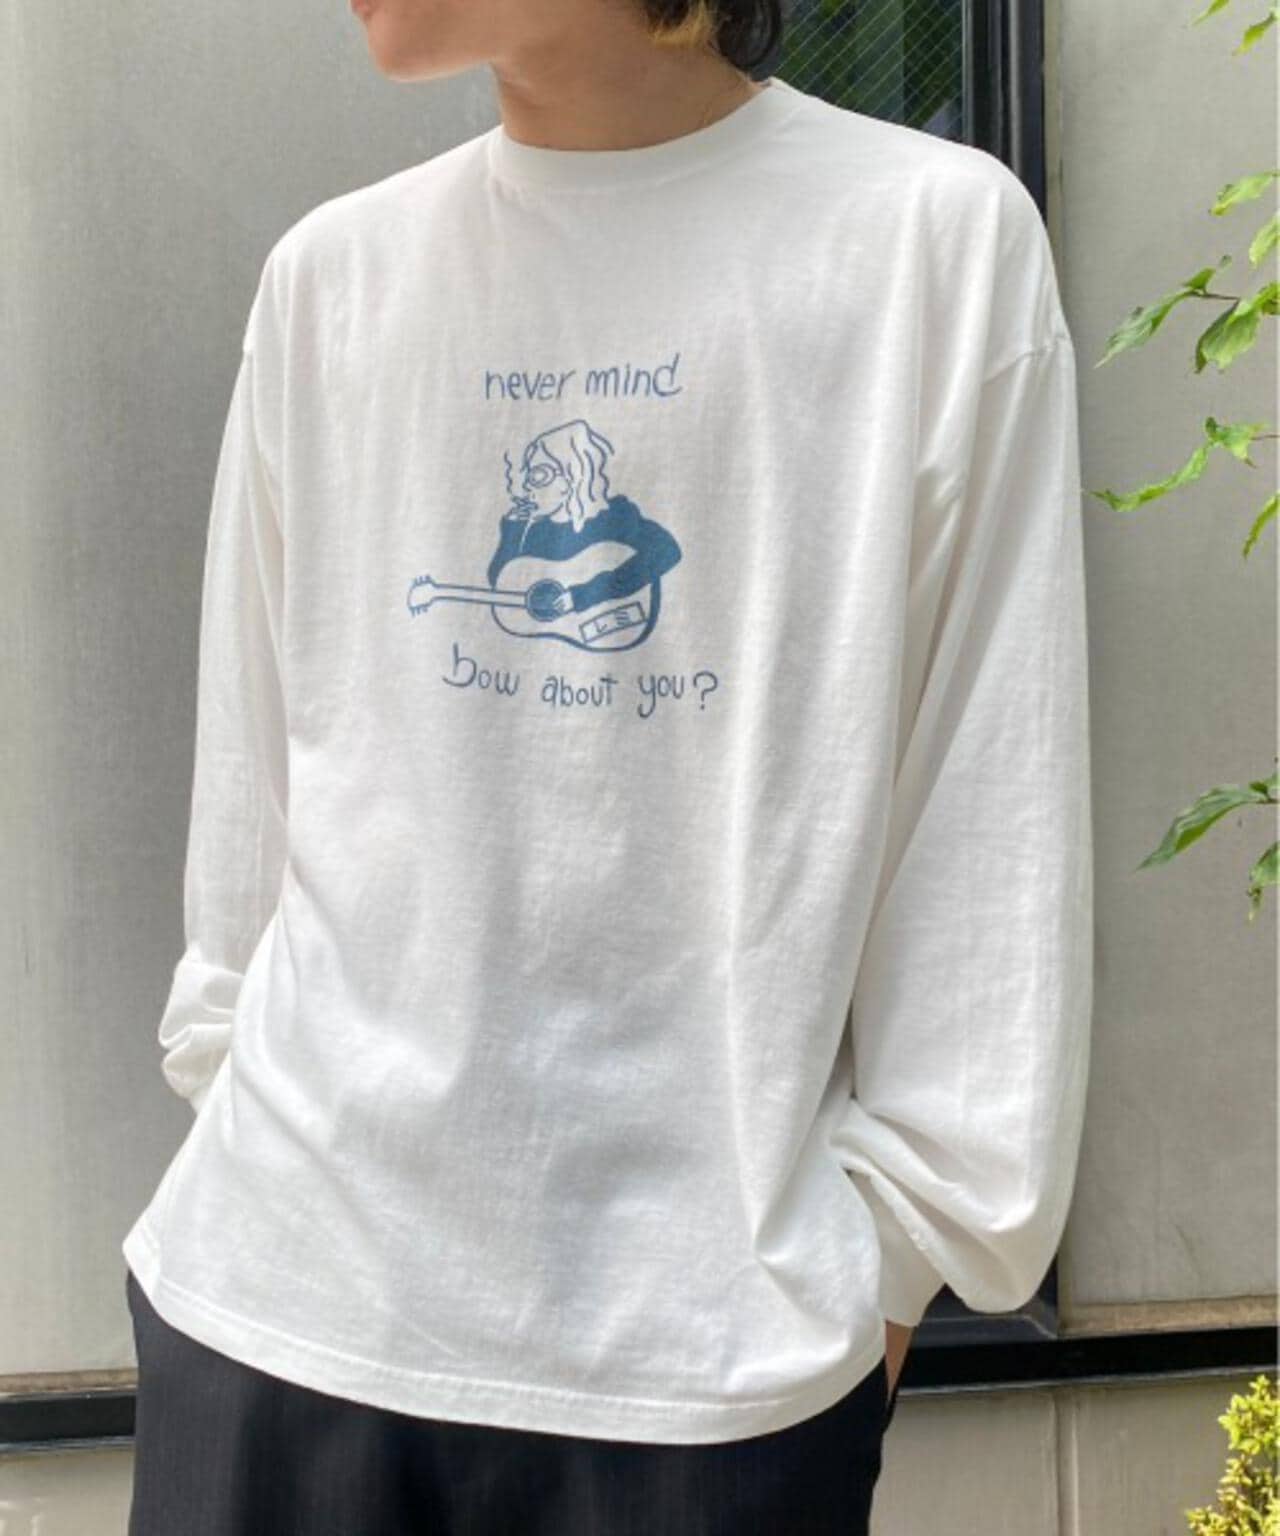 REMI RELIEF/別注LS T-SHIRT(NEVER MIND) | B'2nd ( ビーセカンド